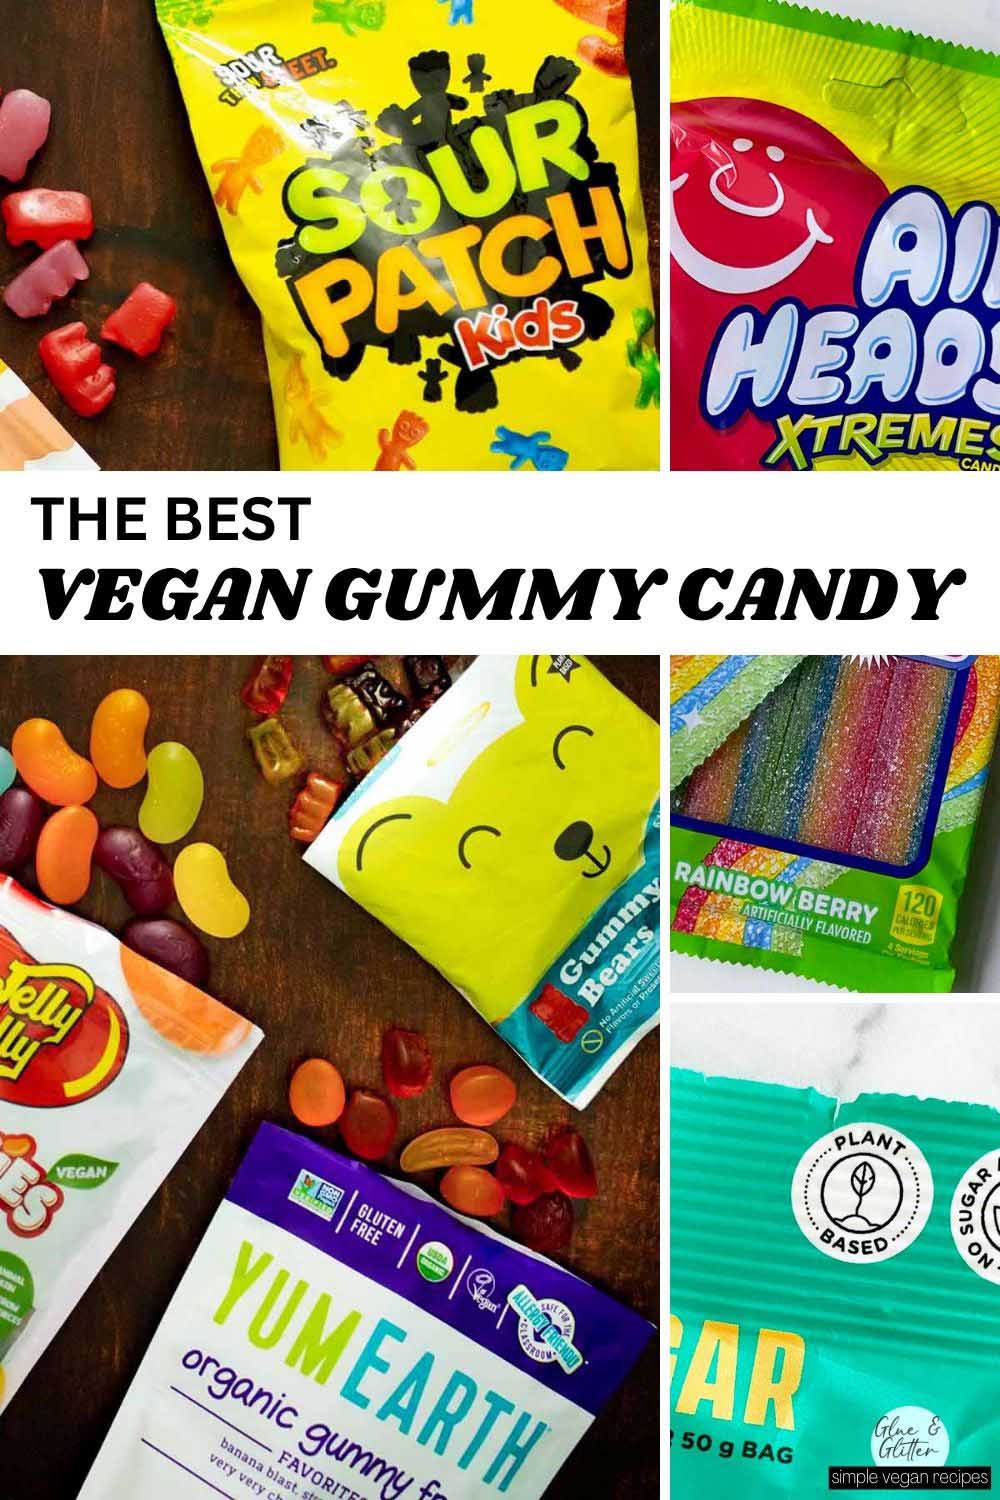 image collage of different types of vegan gummy candy with text overlay that says, "The Best Vegan Gummy Candy"